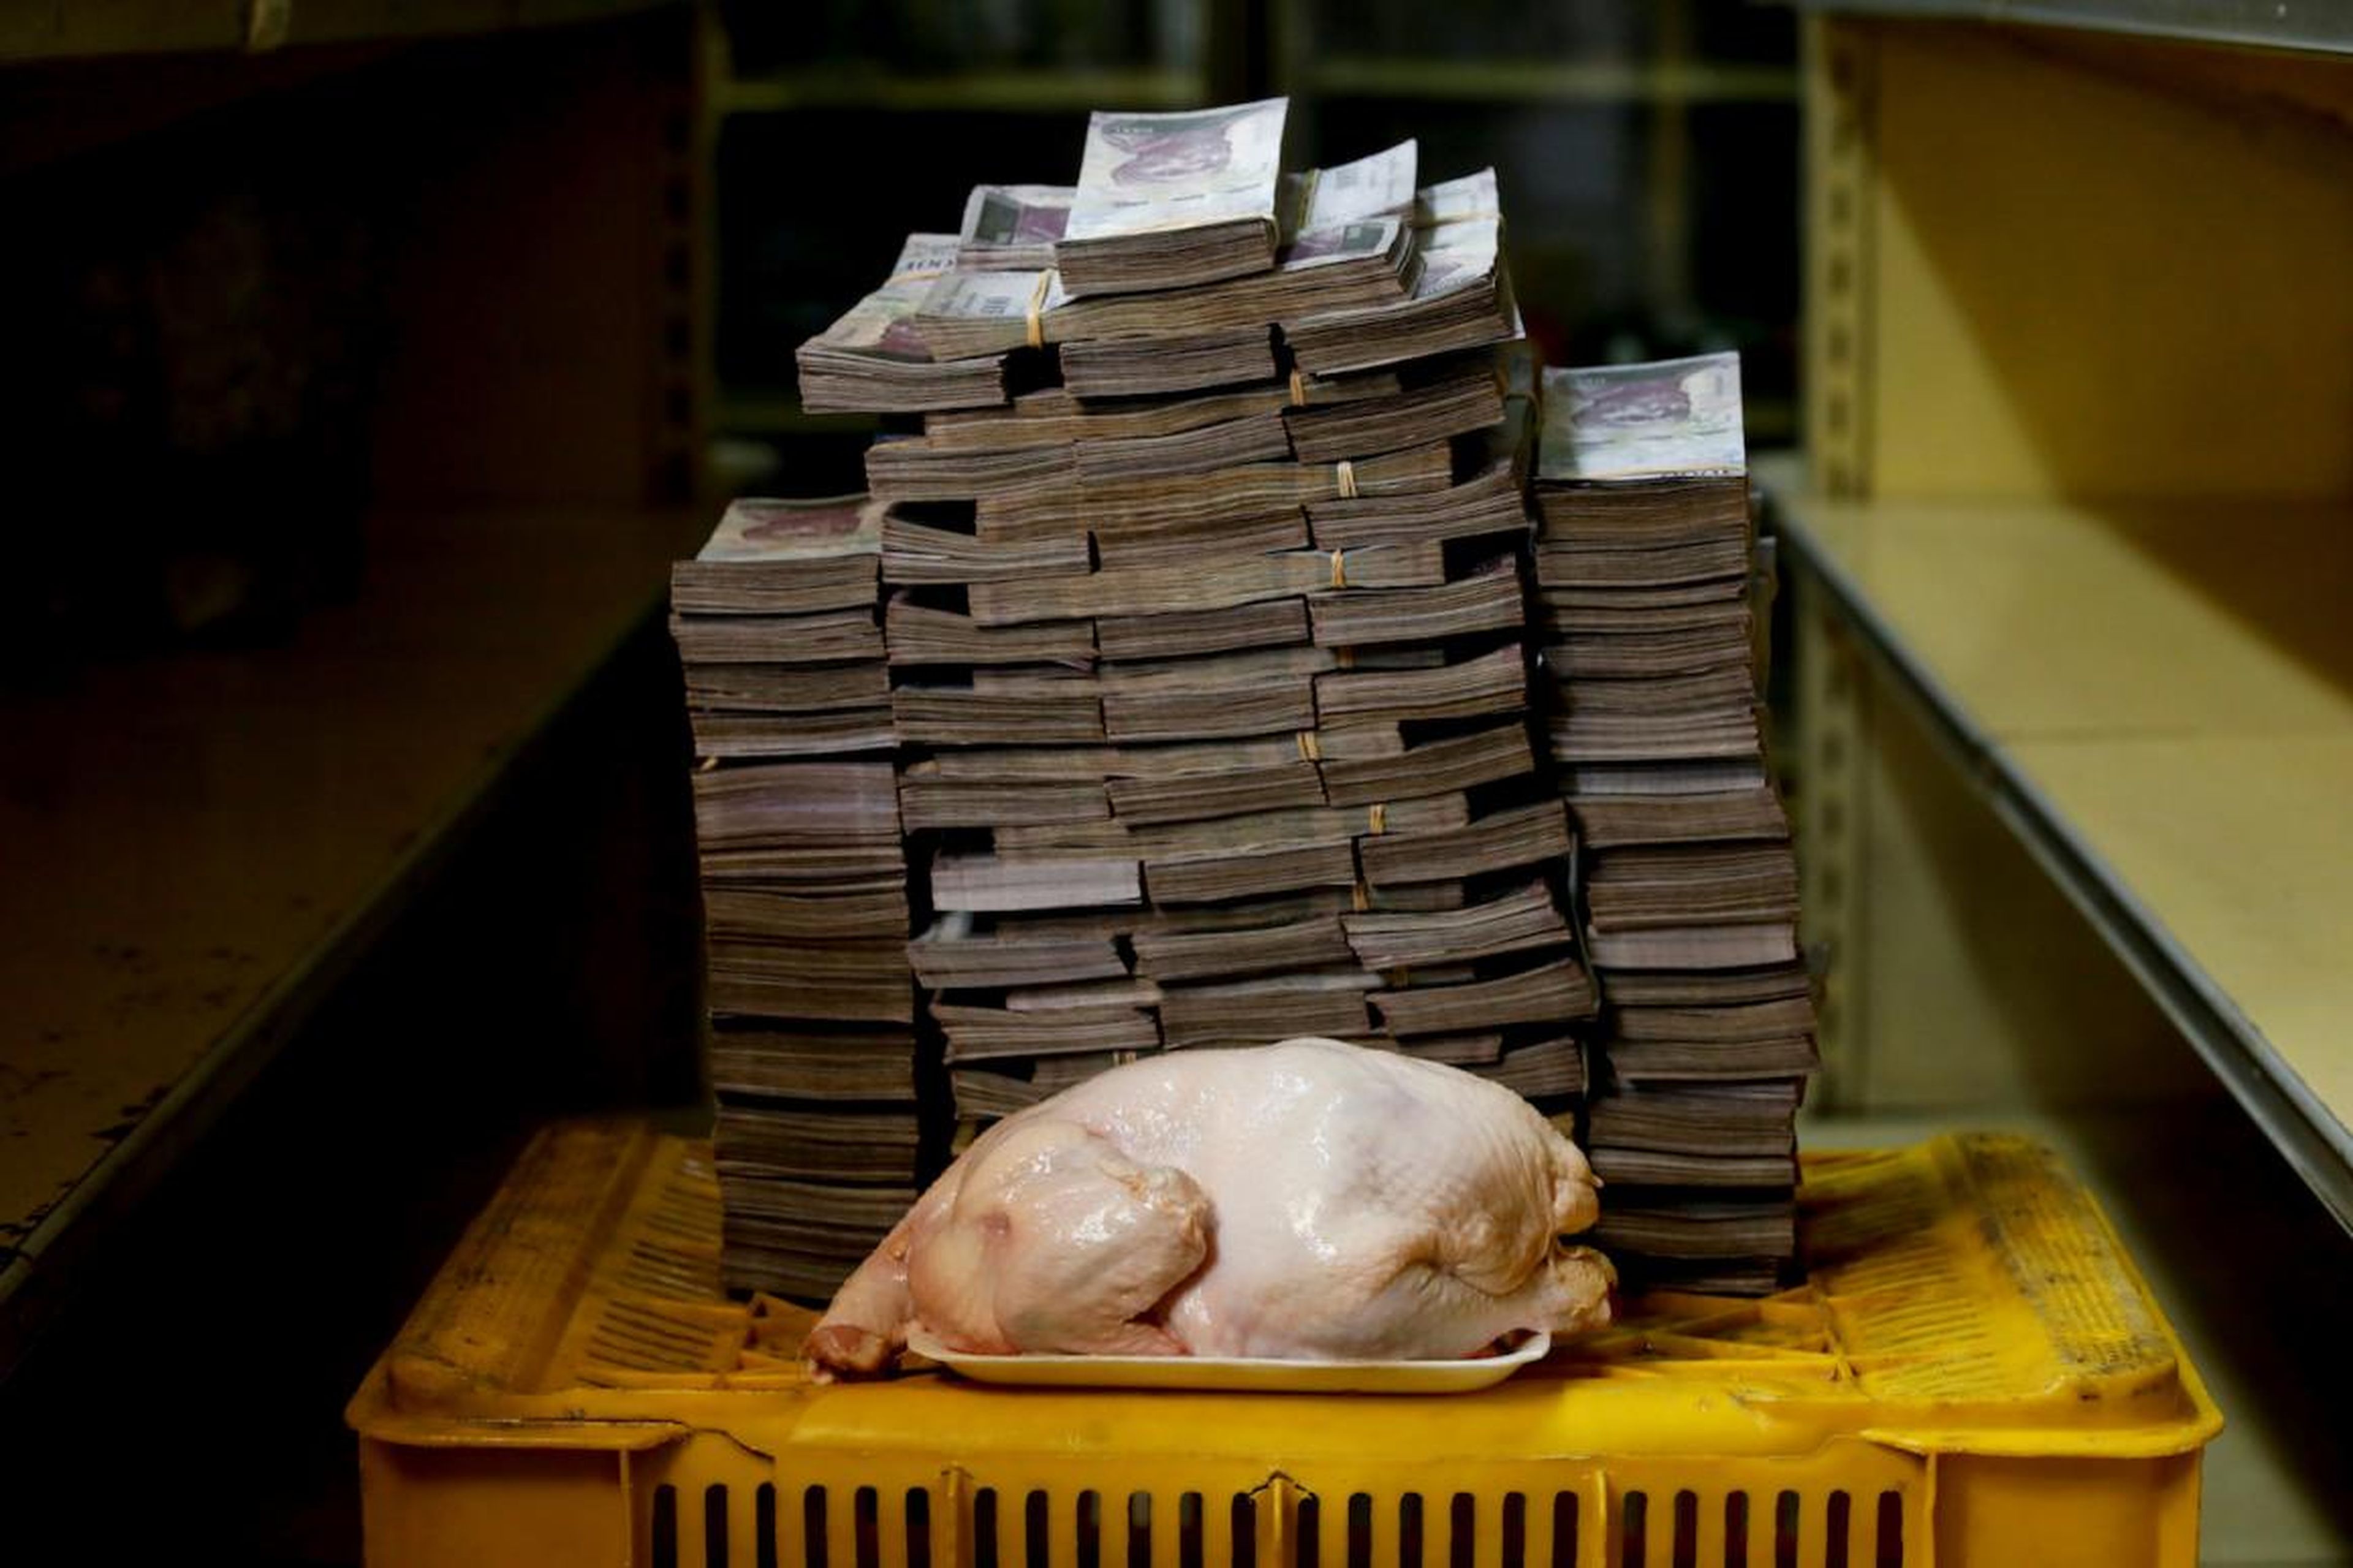 A 2.4 kg chicken is pictured next to 14,600,000 bolivars, its price and the equivalent of 2.22 USD, at a mini-market in Caracas, Venezuela.